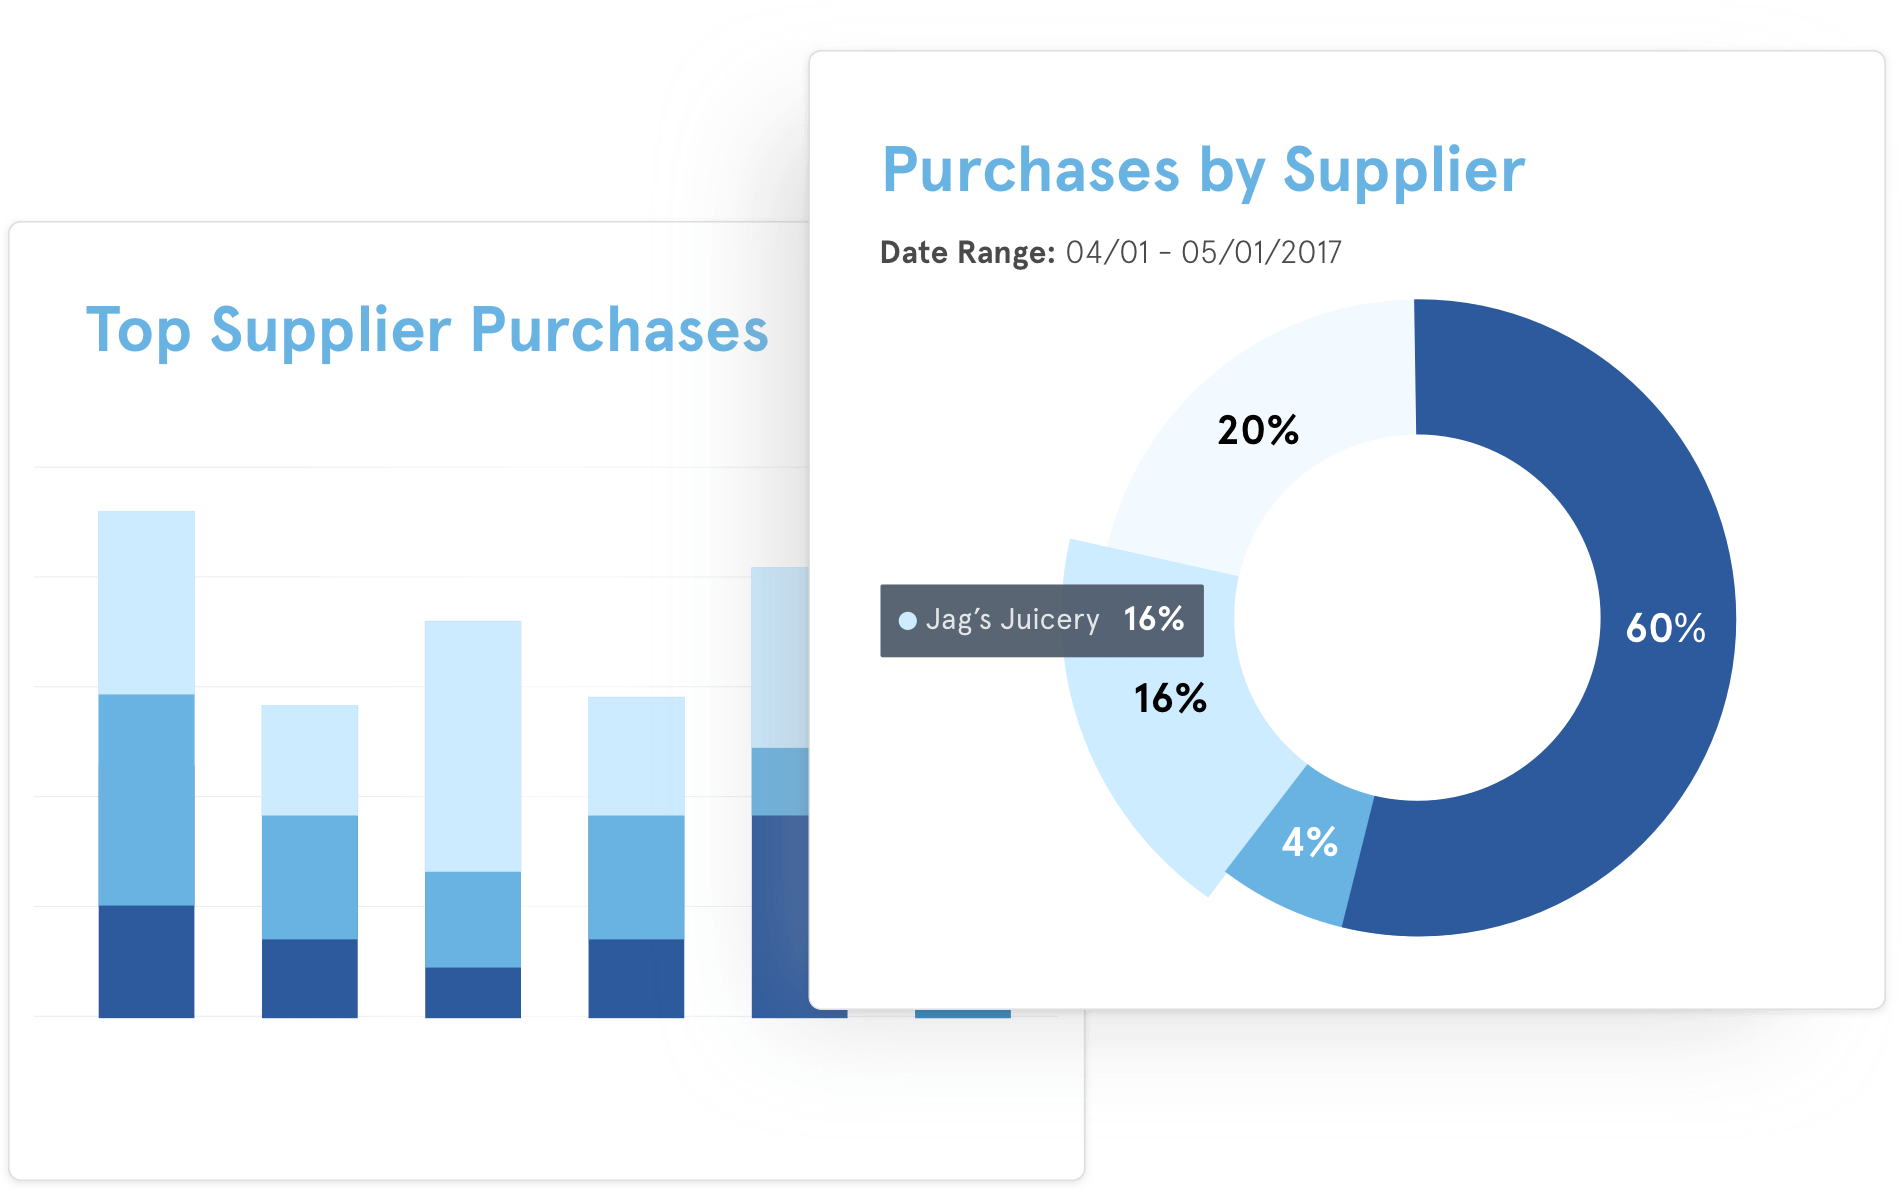 BlueCart Software - Users can view analytics to gain insight on past sales and purchases